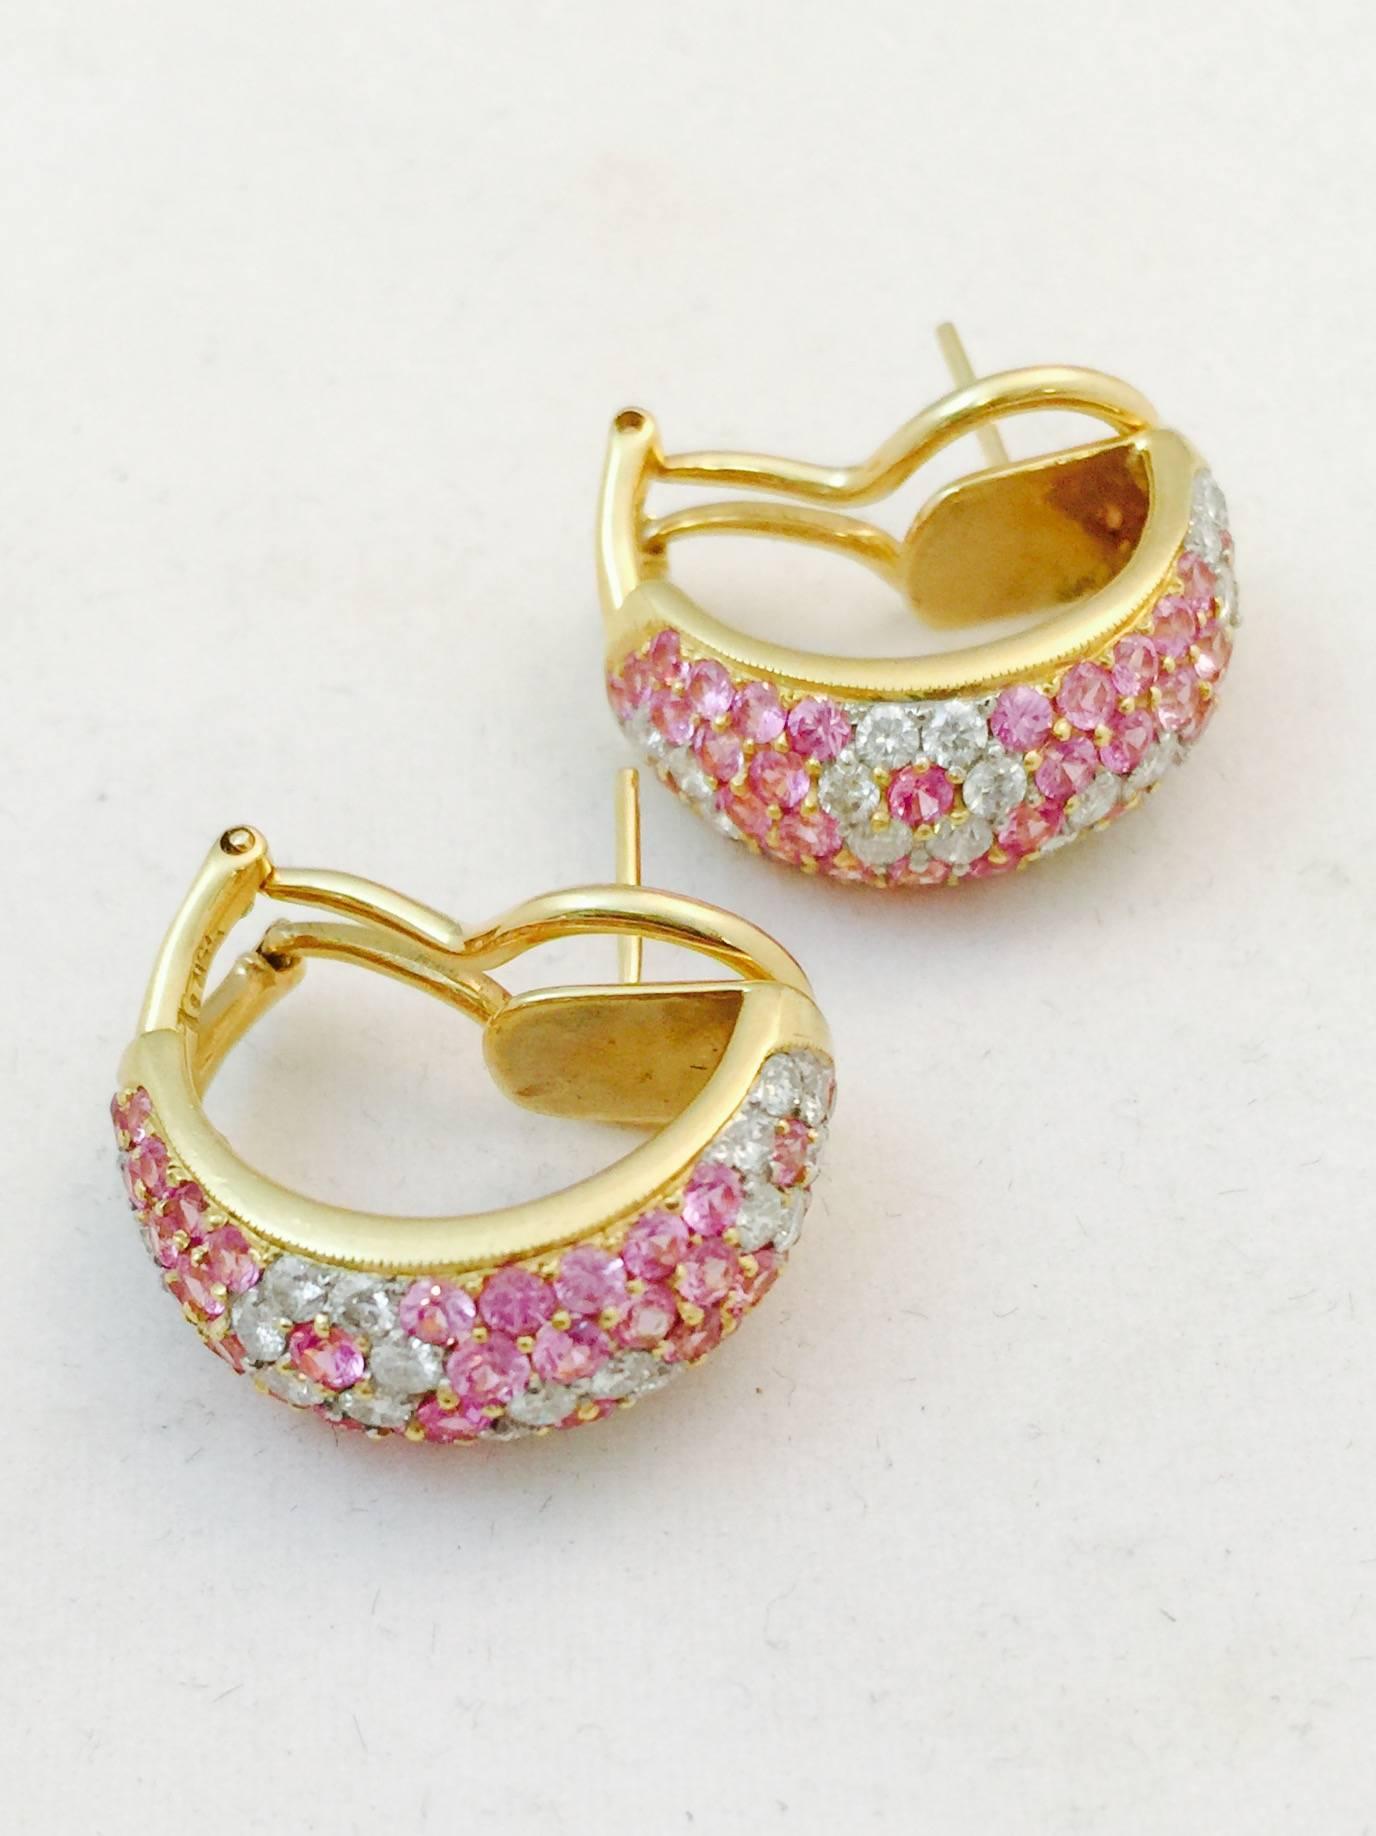 Distinctly feminine and meticulously crafted in 18 karat yellow gold, these Omega back pierced earrings are 1/2 hoop design.  Encrusted in round, faceted, perfectly matched pink sapphires and white brilliant cut diamonds that create a floral design.